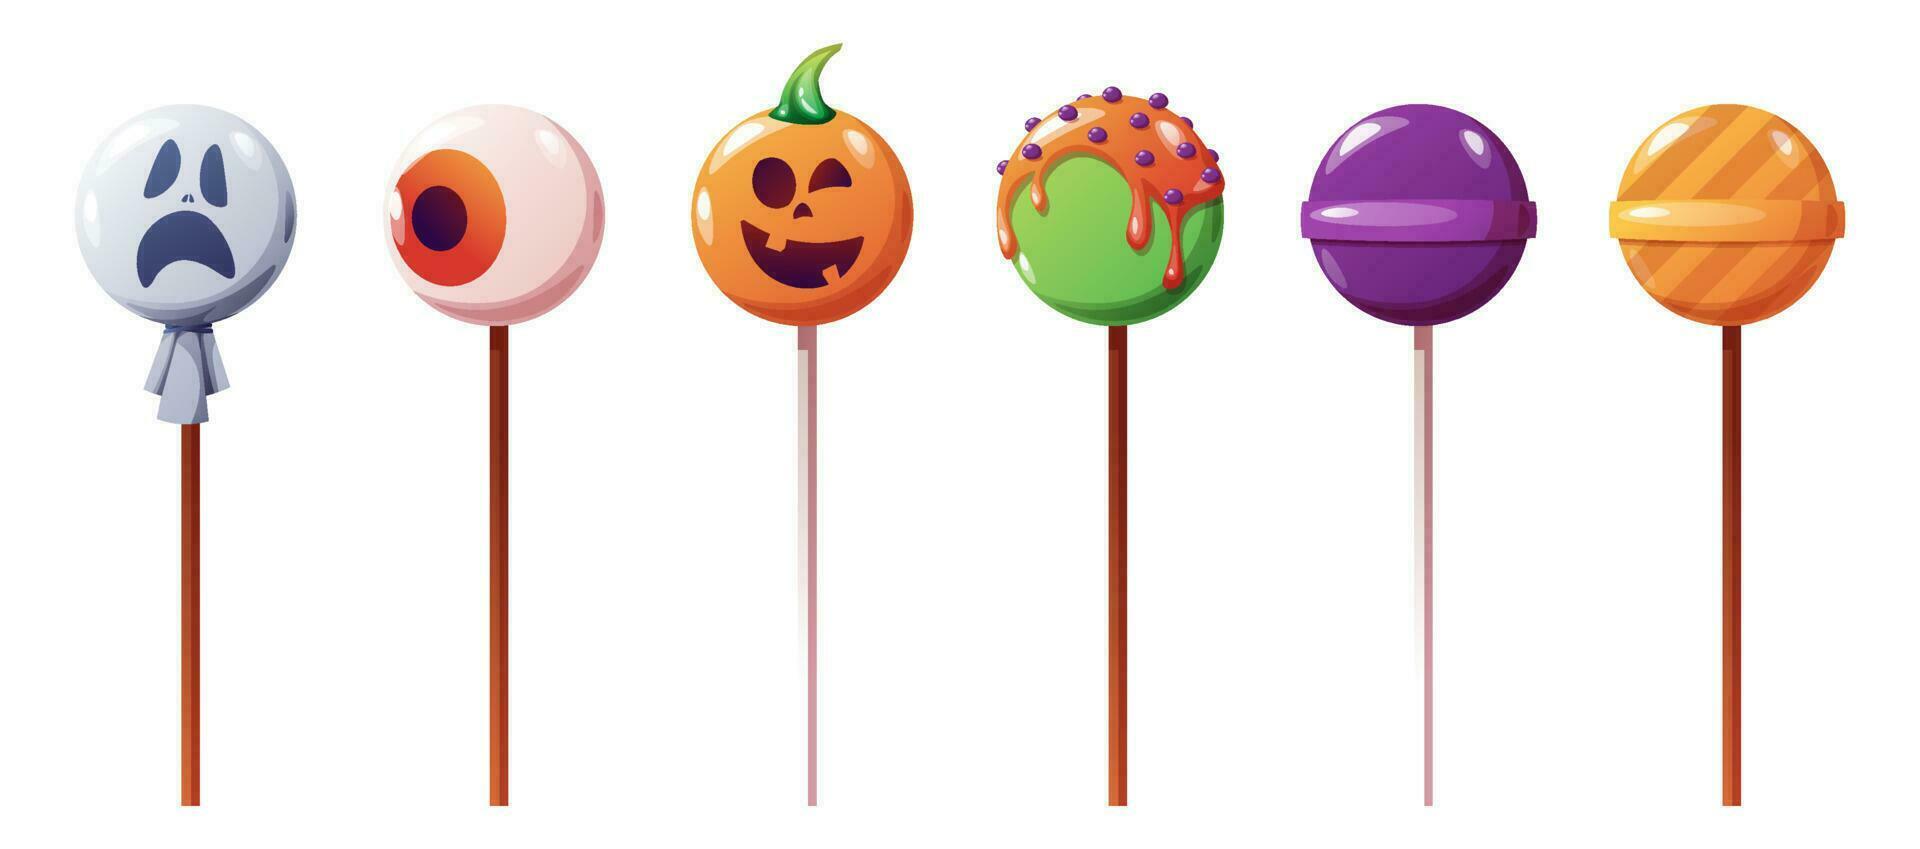 Halloween sweet lollipops, round lollipops. Vector cartoon set of caramel suckers with patterns, candy on a stick with a pattern of pumpkin, ghost